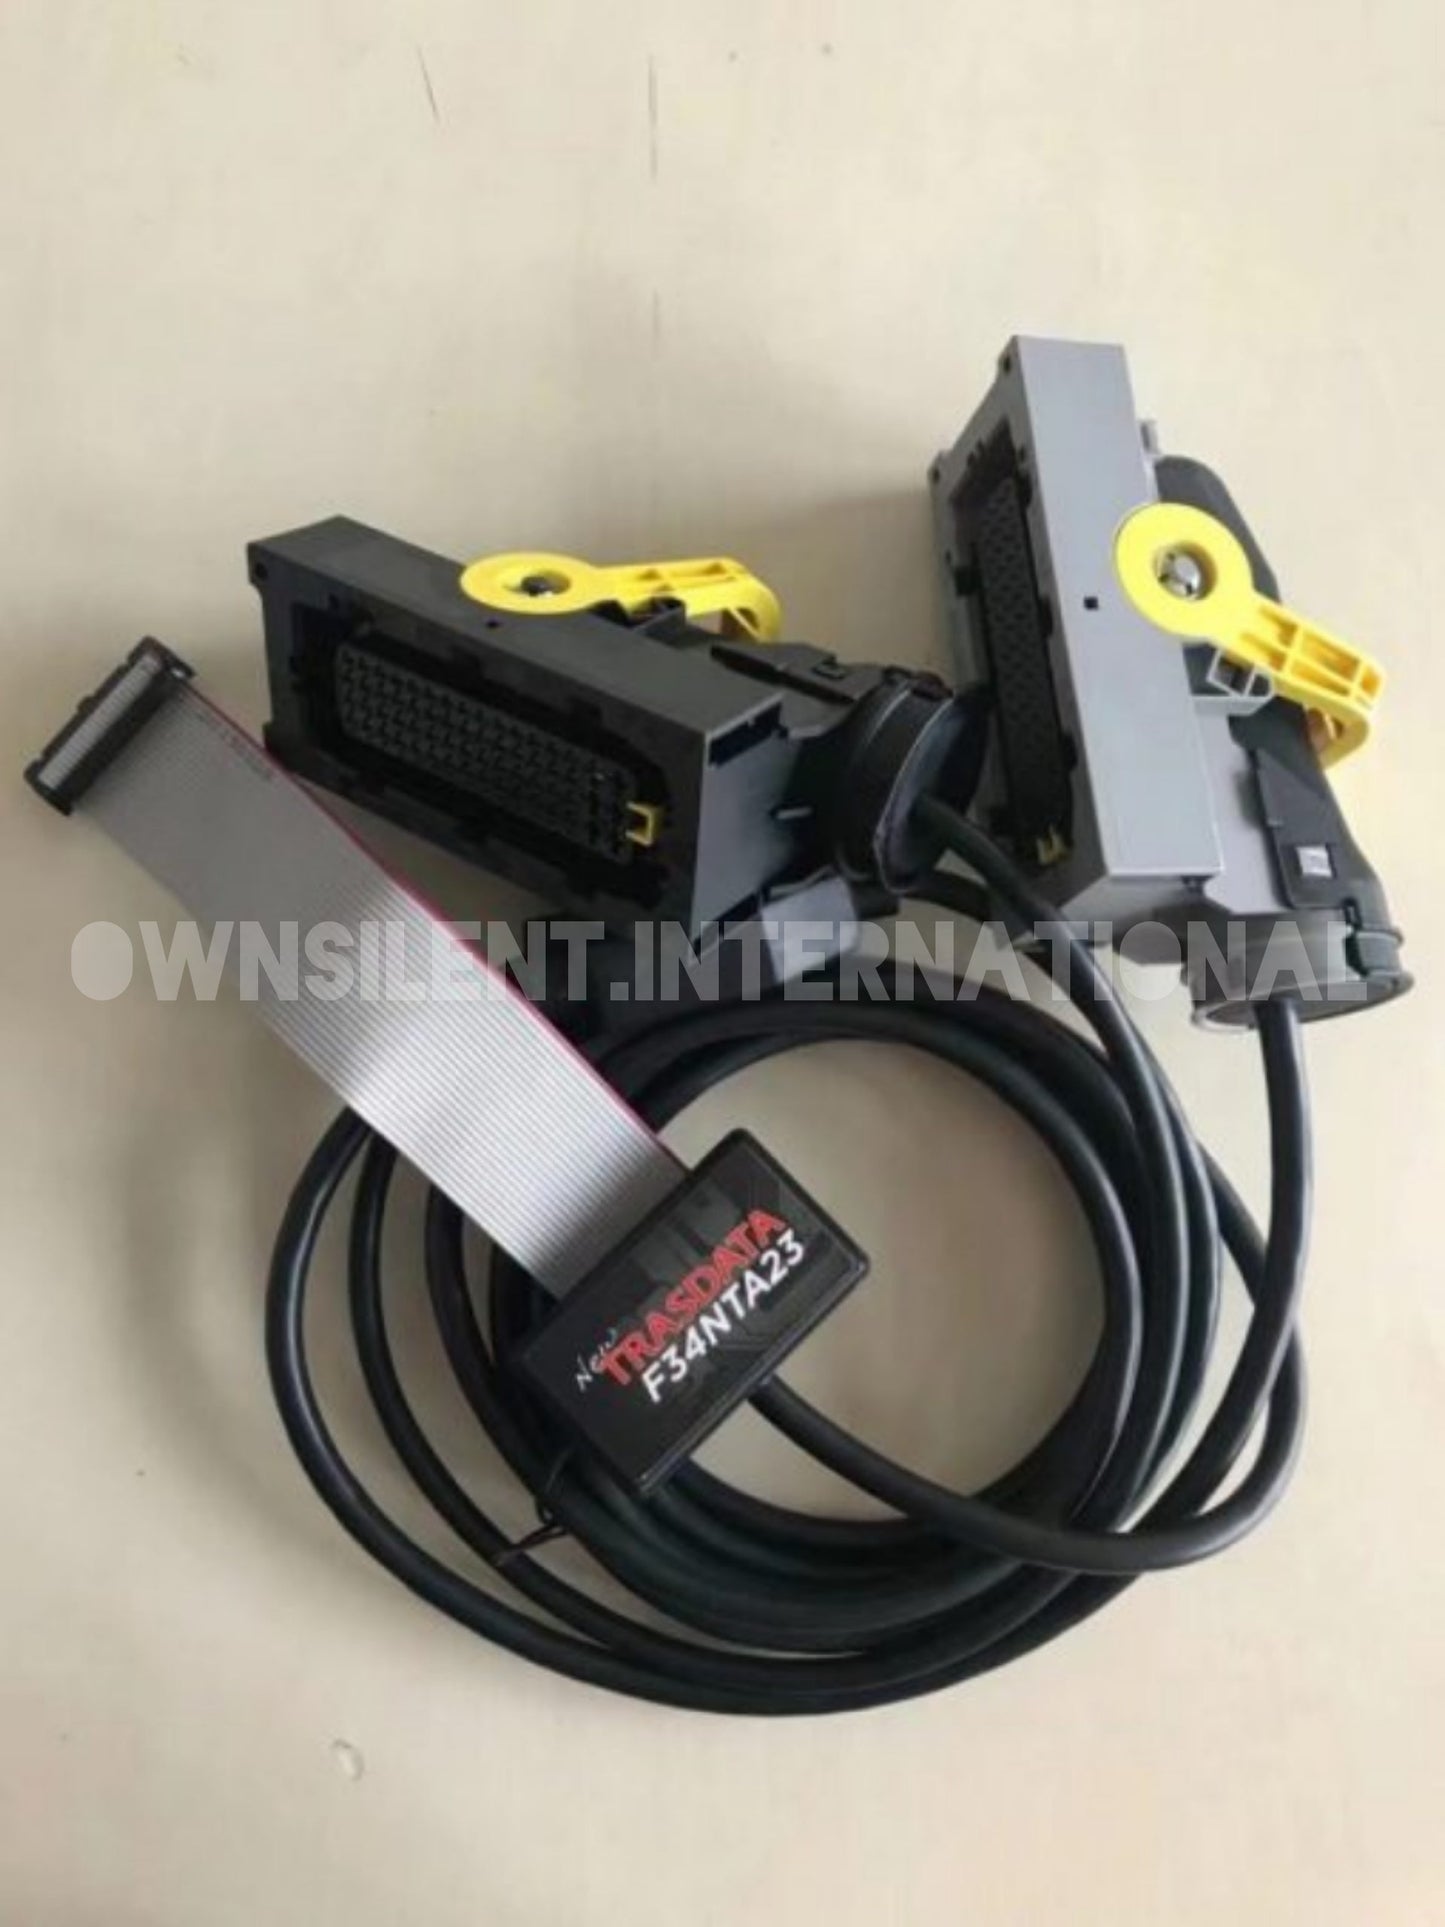 Dimsport New Trasdata Connection Cable – F34NTA23 for the ECU of Volvo Truck